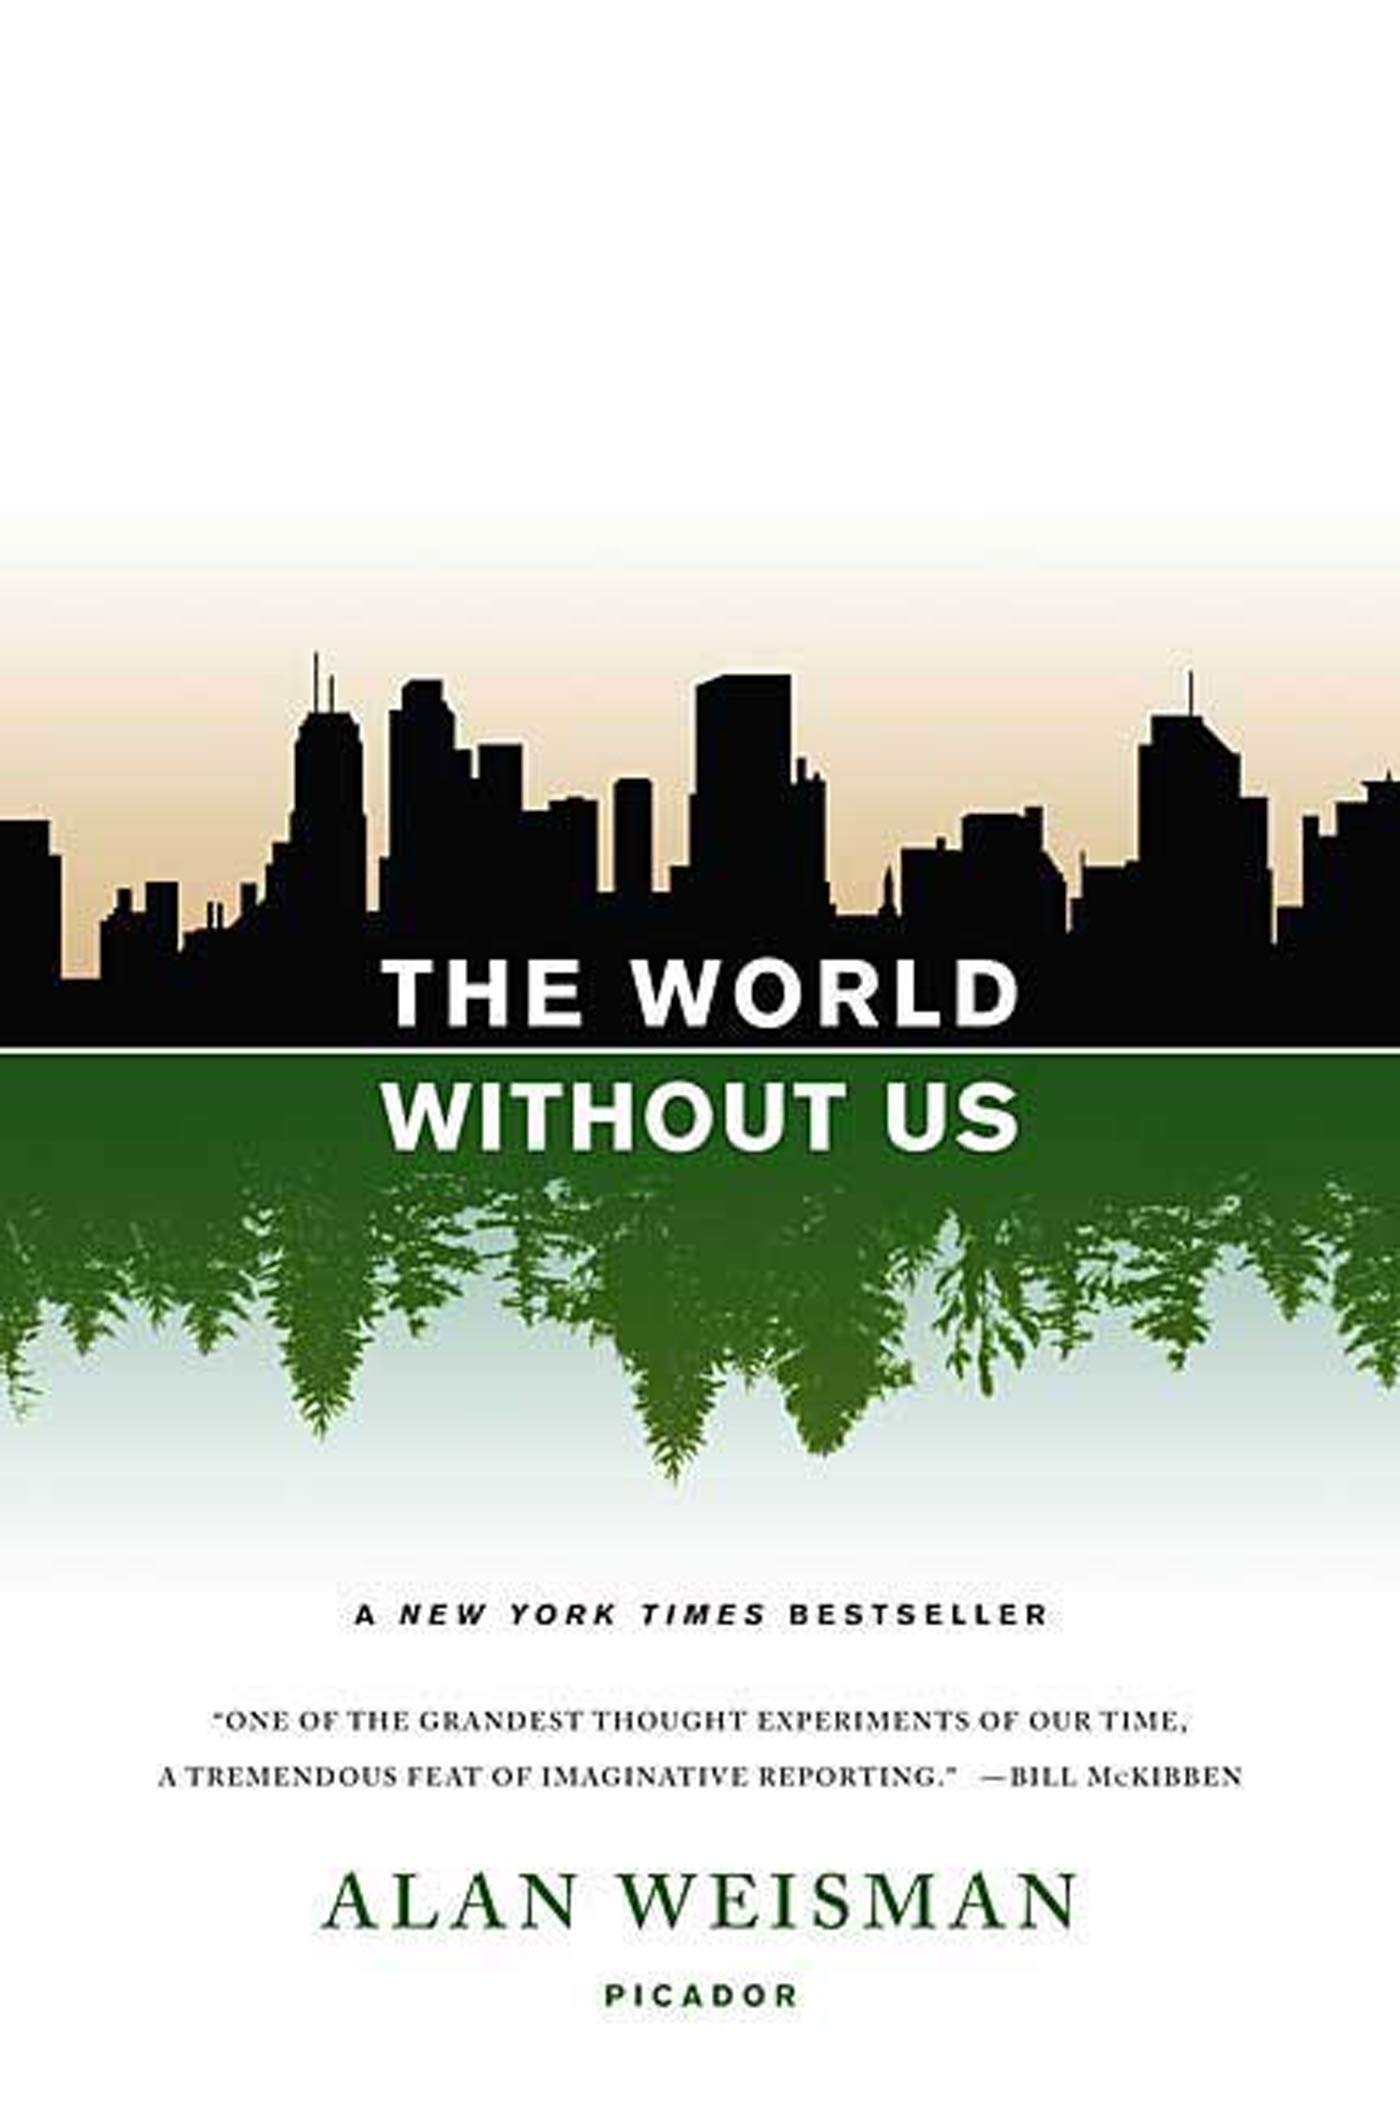 McAuliffe Morning Book Club: The World Without Us by Alan Weisman thumbnail Photo